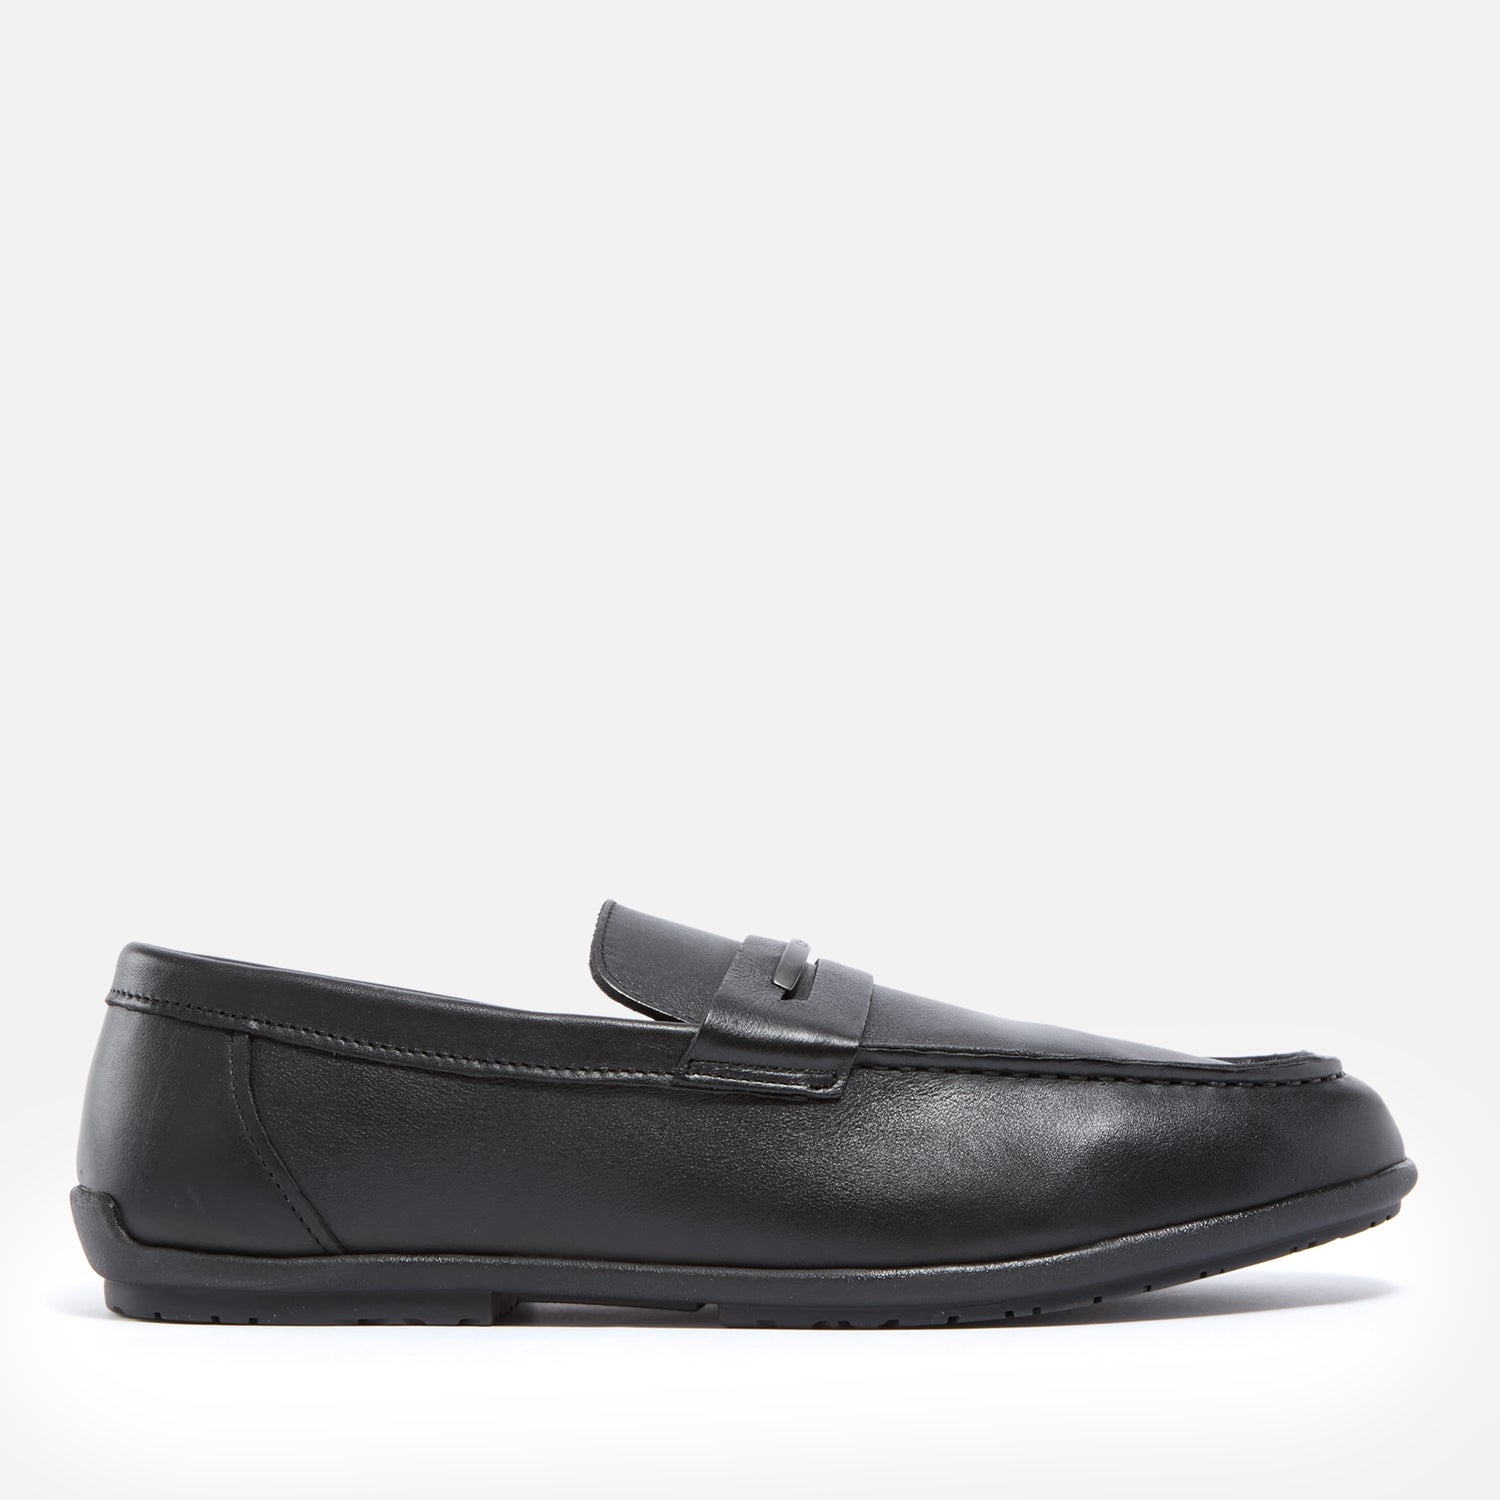 Calvin Klein Men's Leather Penny Loafers - UK 10